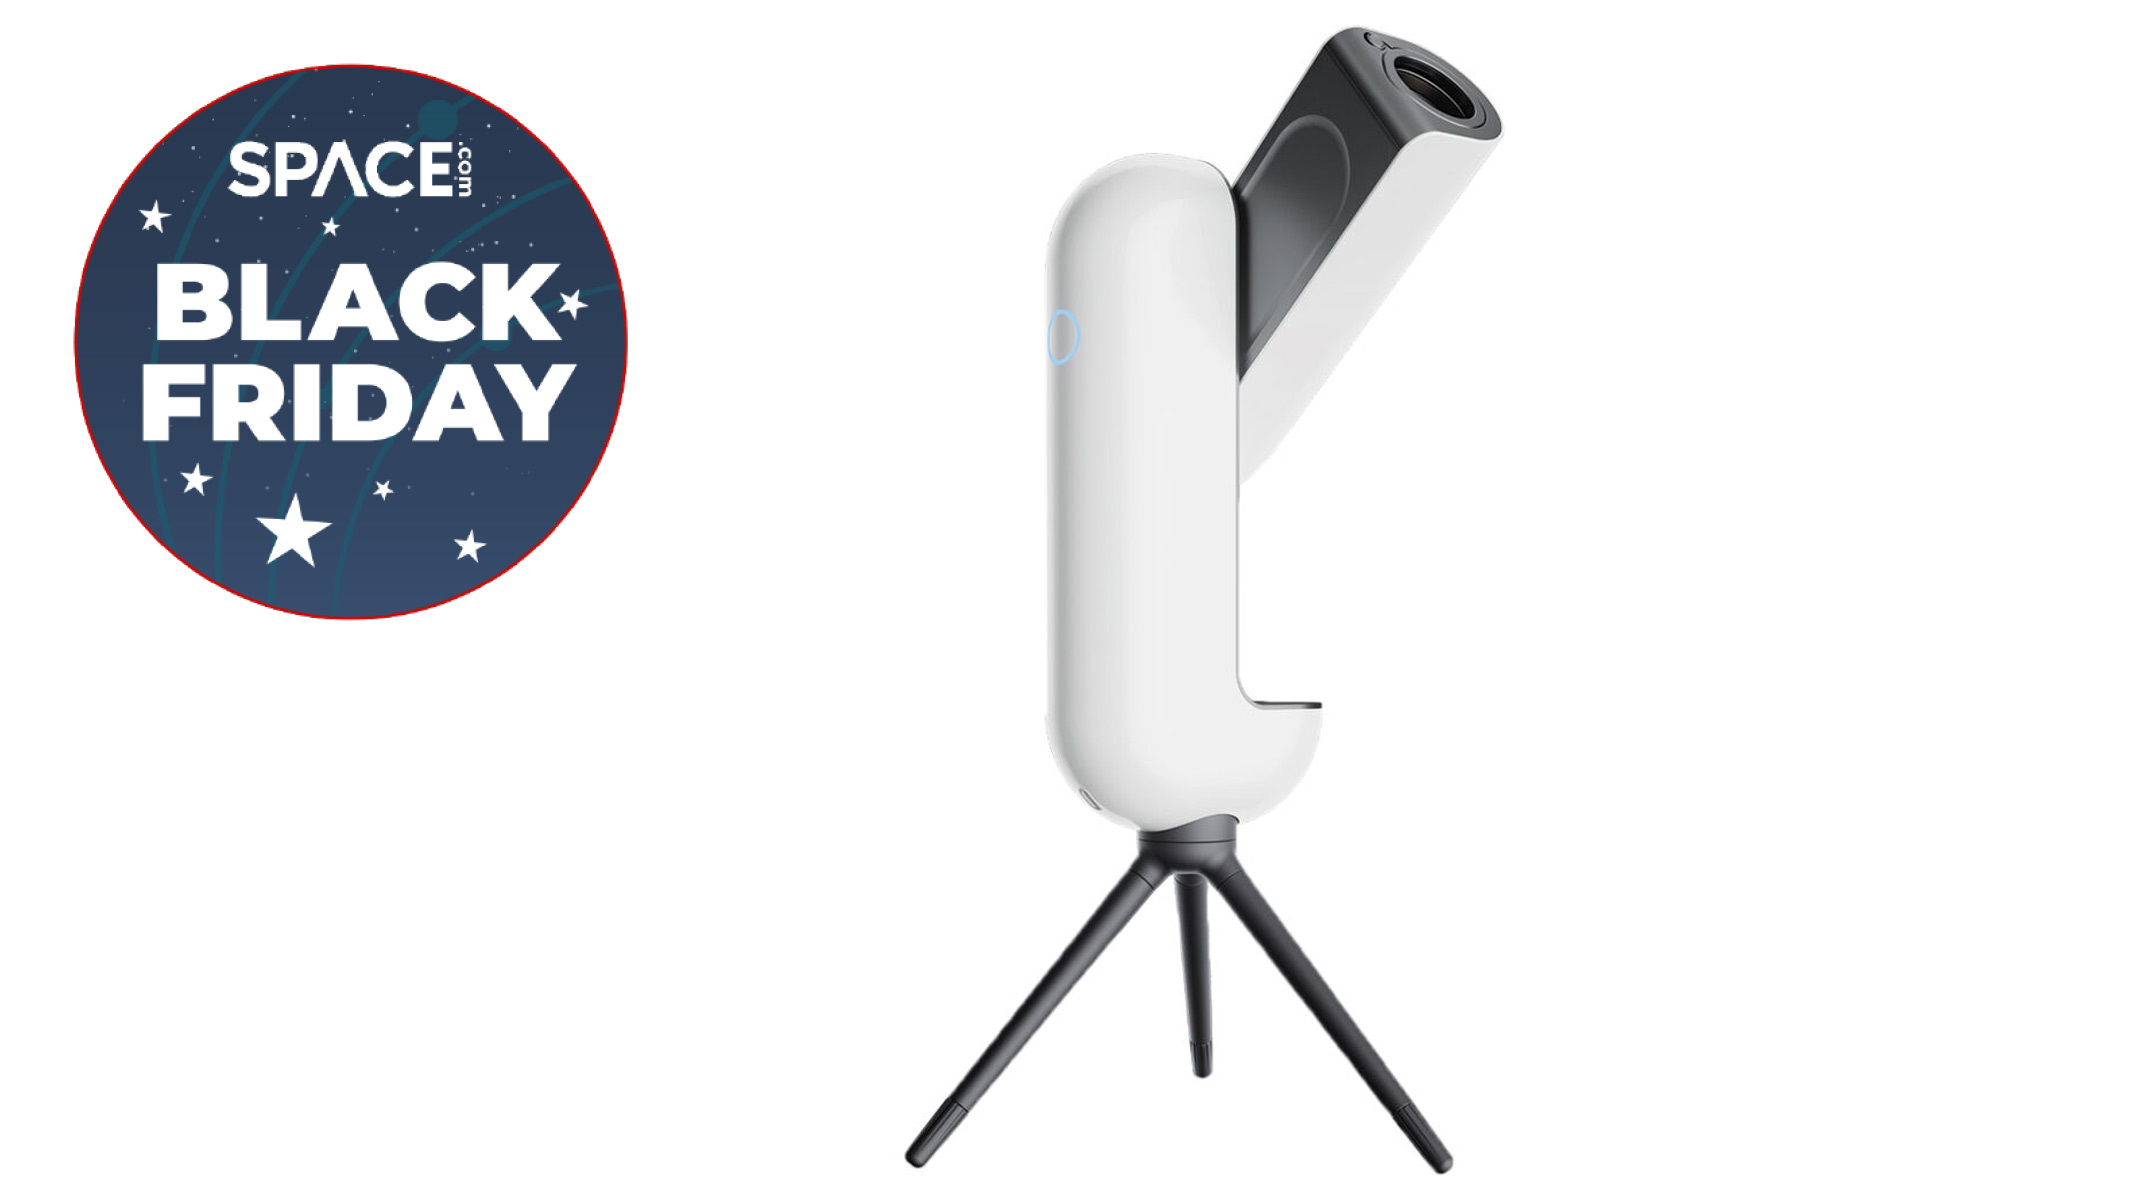 Vaonis vespera smart telescope on a white background with black friday deal logo